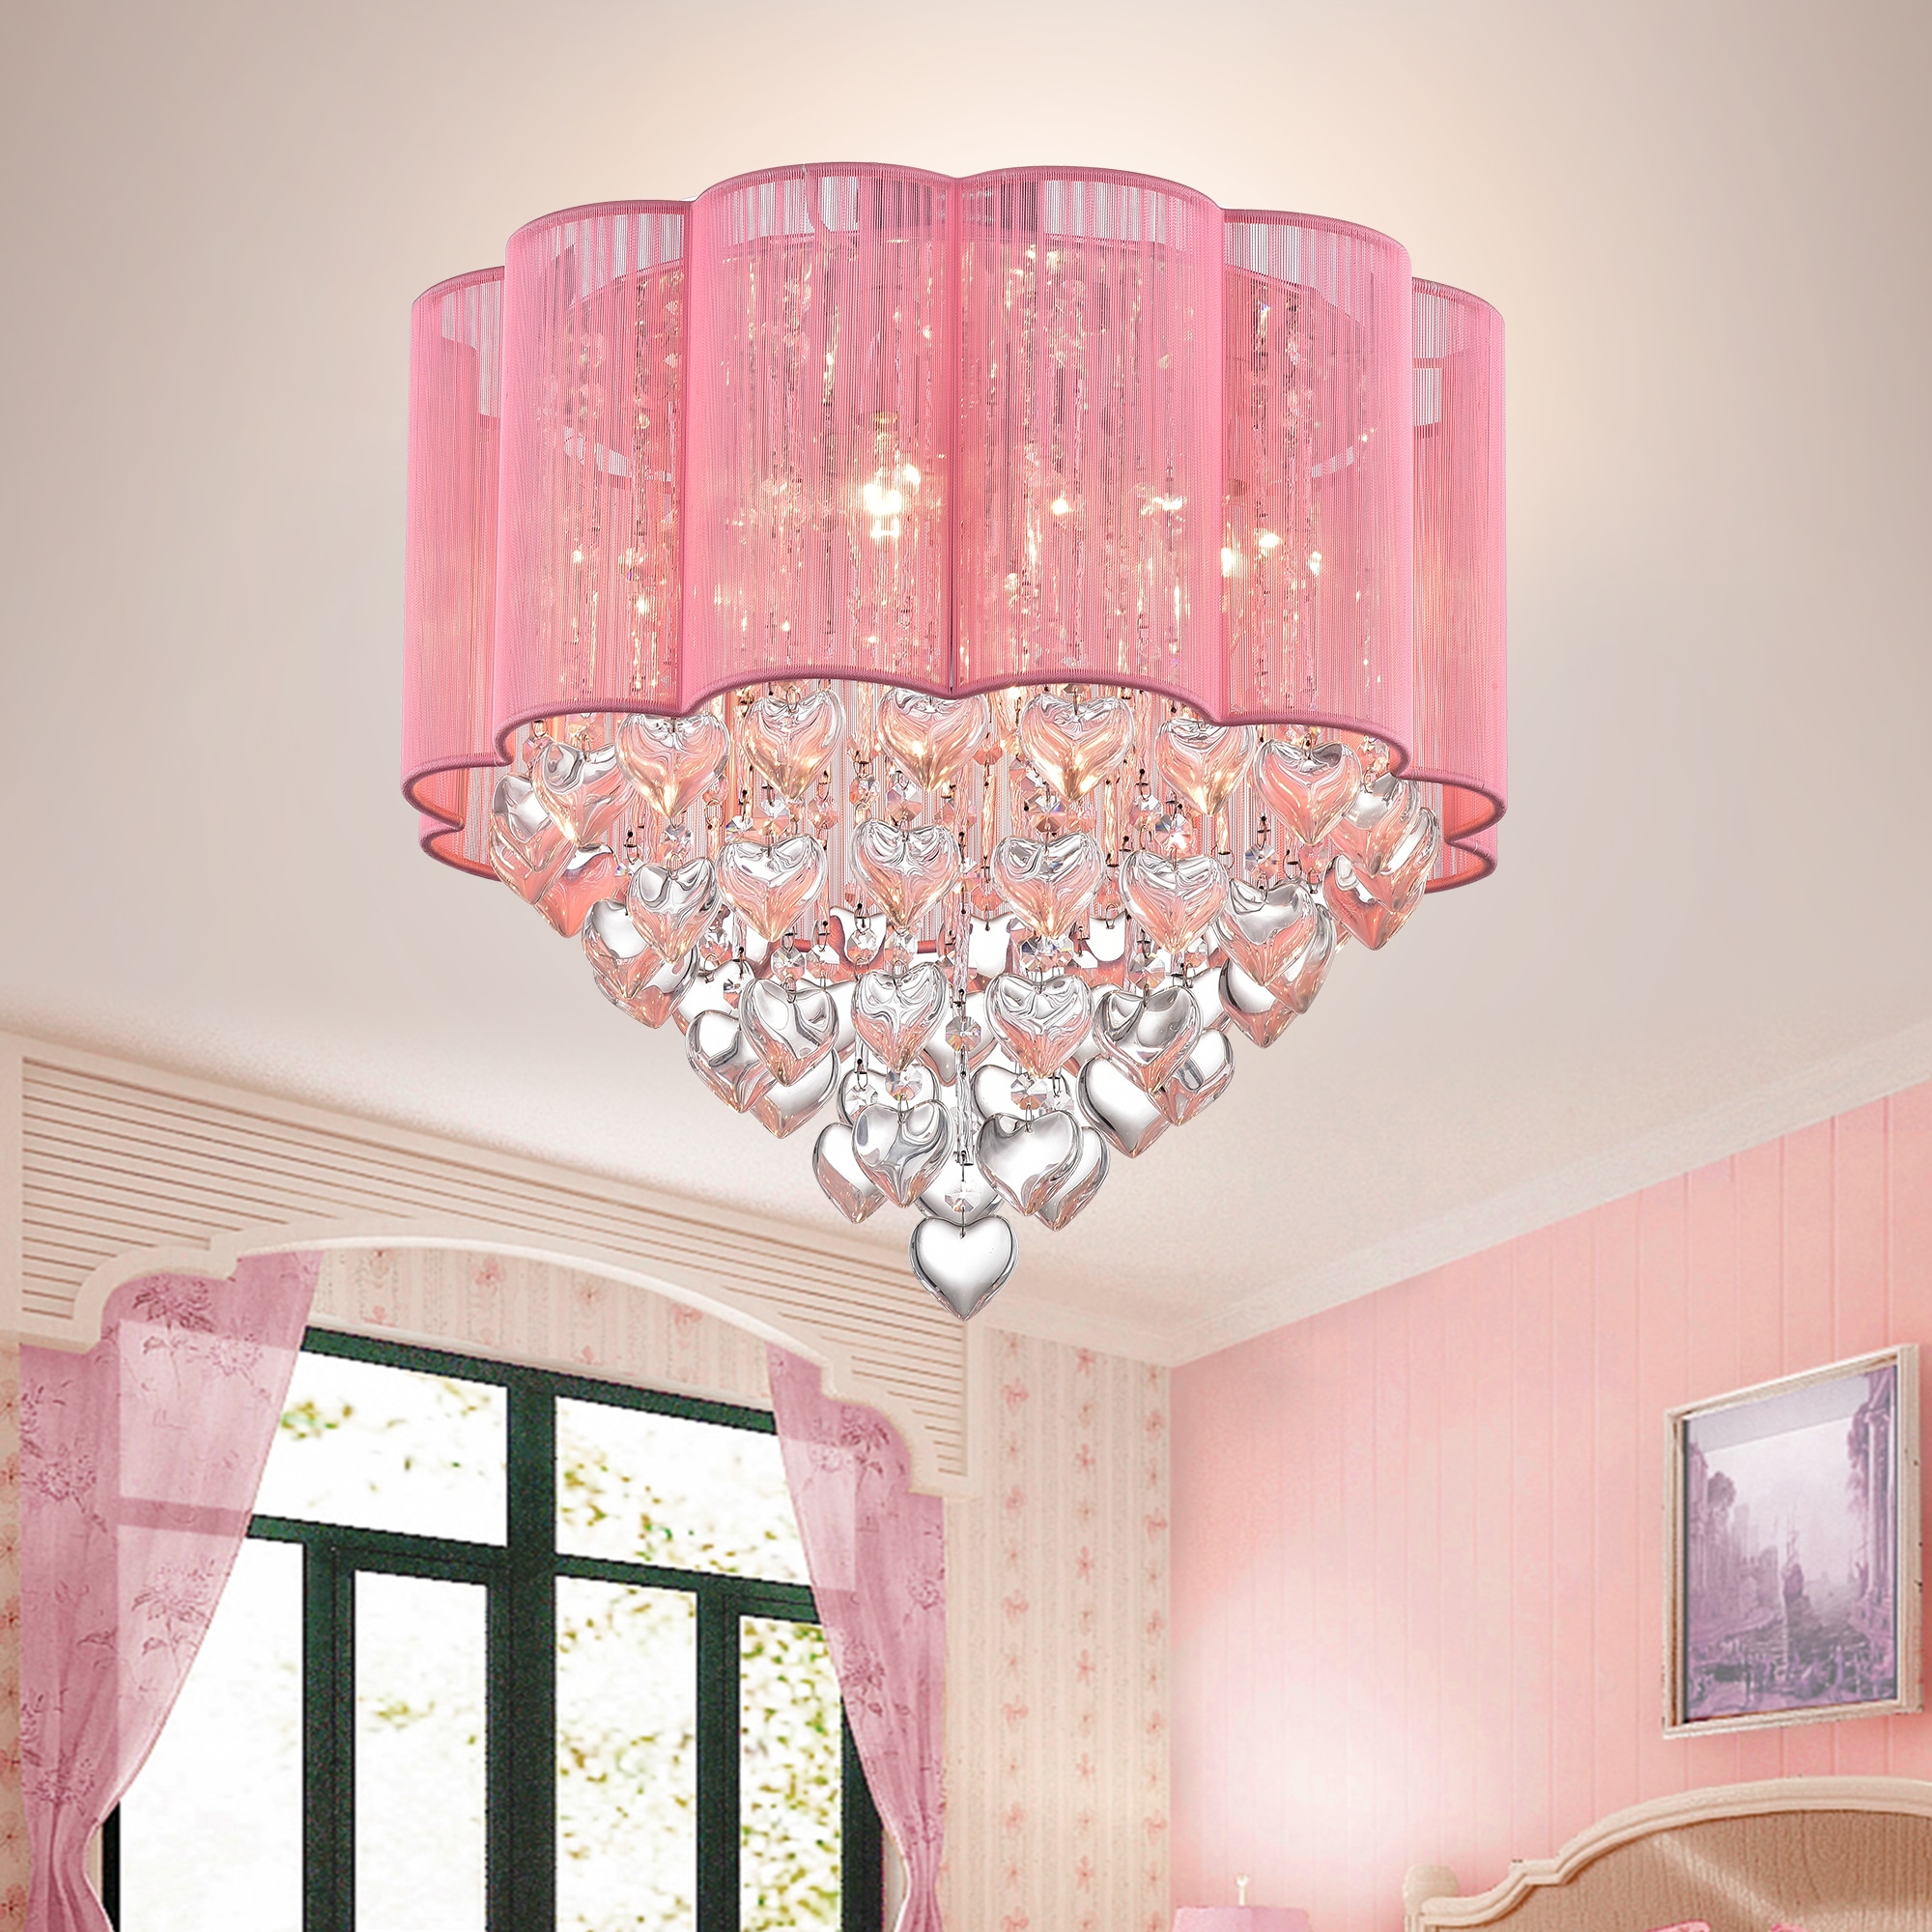 CRYSTAL CHANDELIER CHANDELIERS LIGHTING WITH PINK COLOR CRYSTAL AND SHADES! 